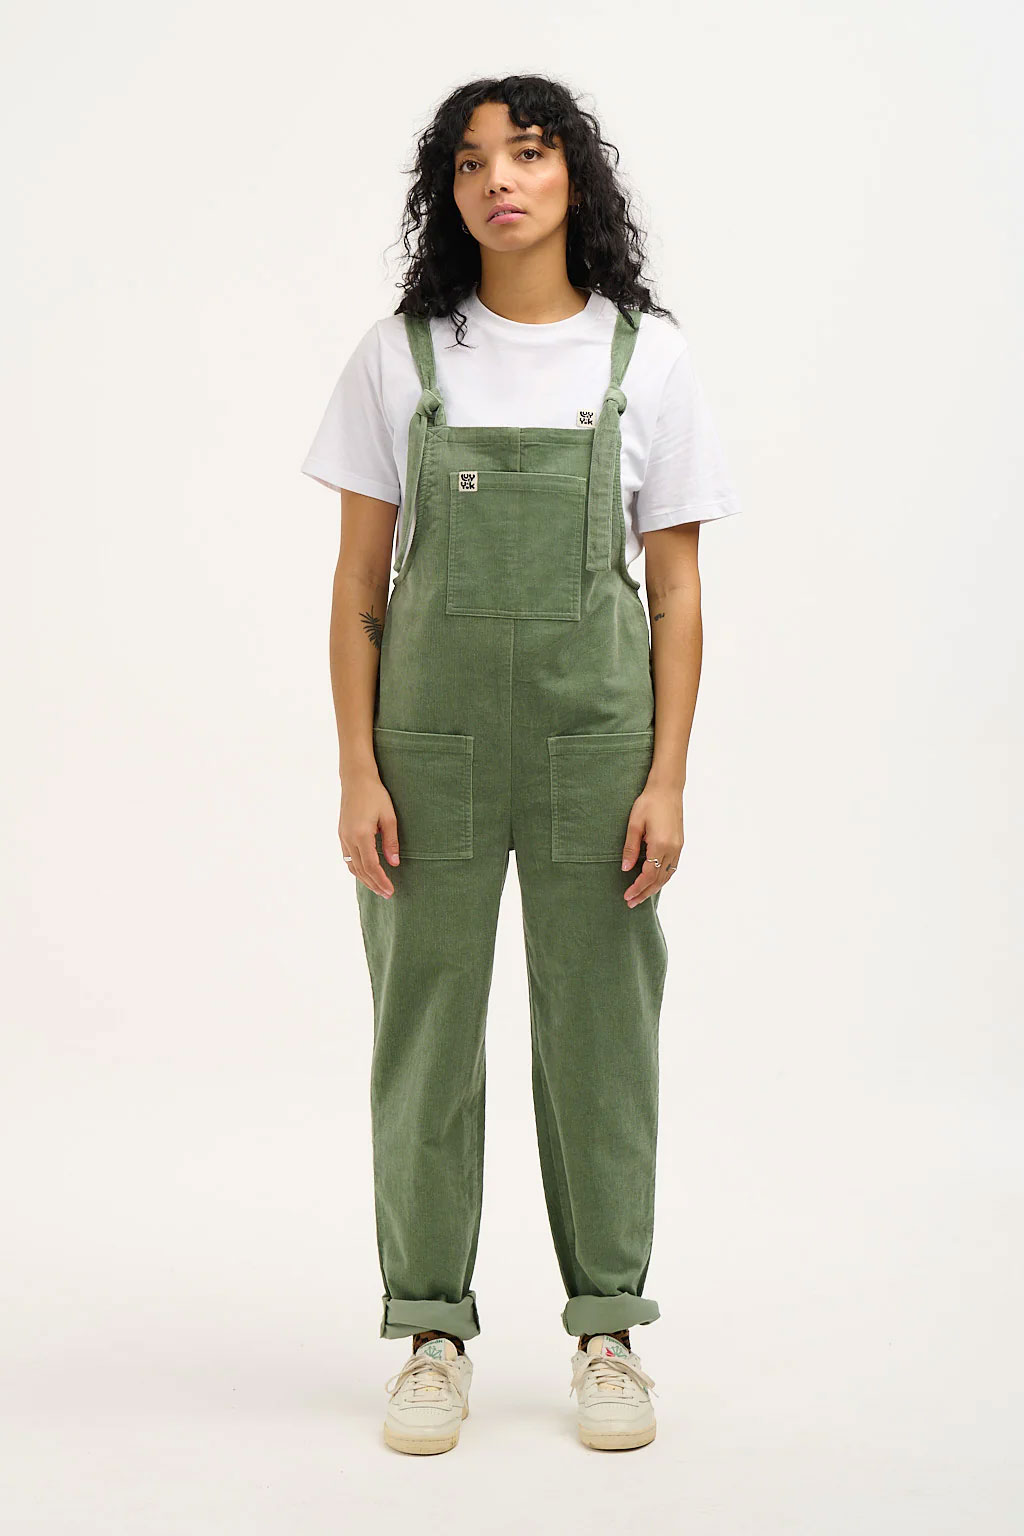 Organic Corduroy Dungarees from Lucy & Yak that come in so many incredible hues! 